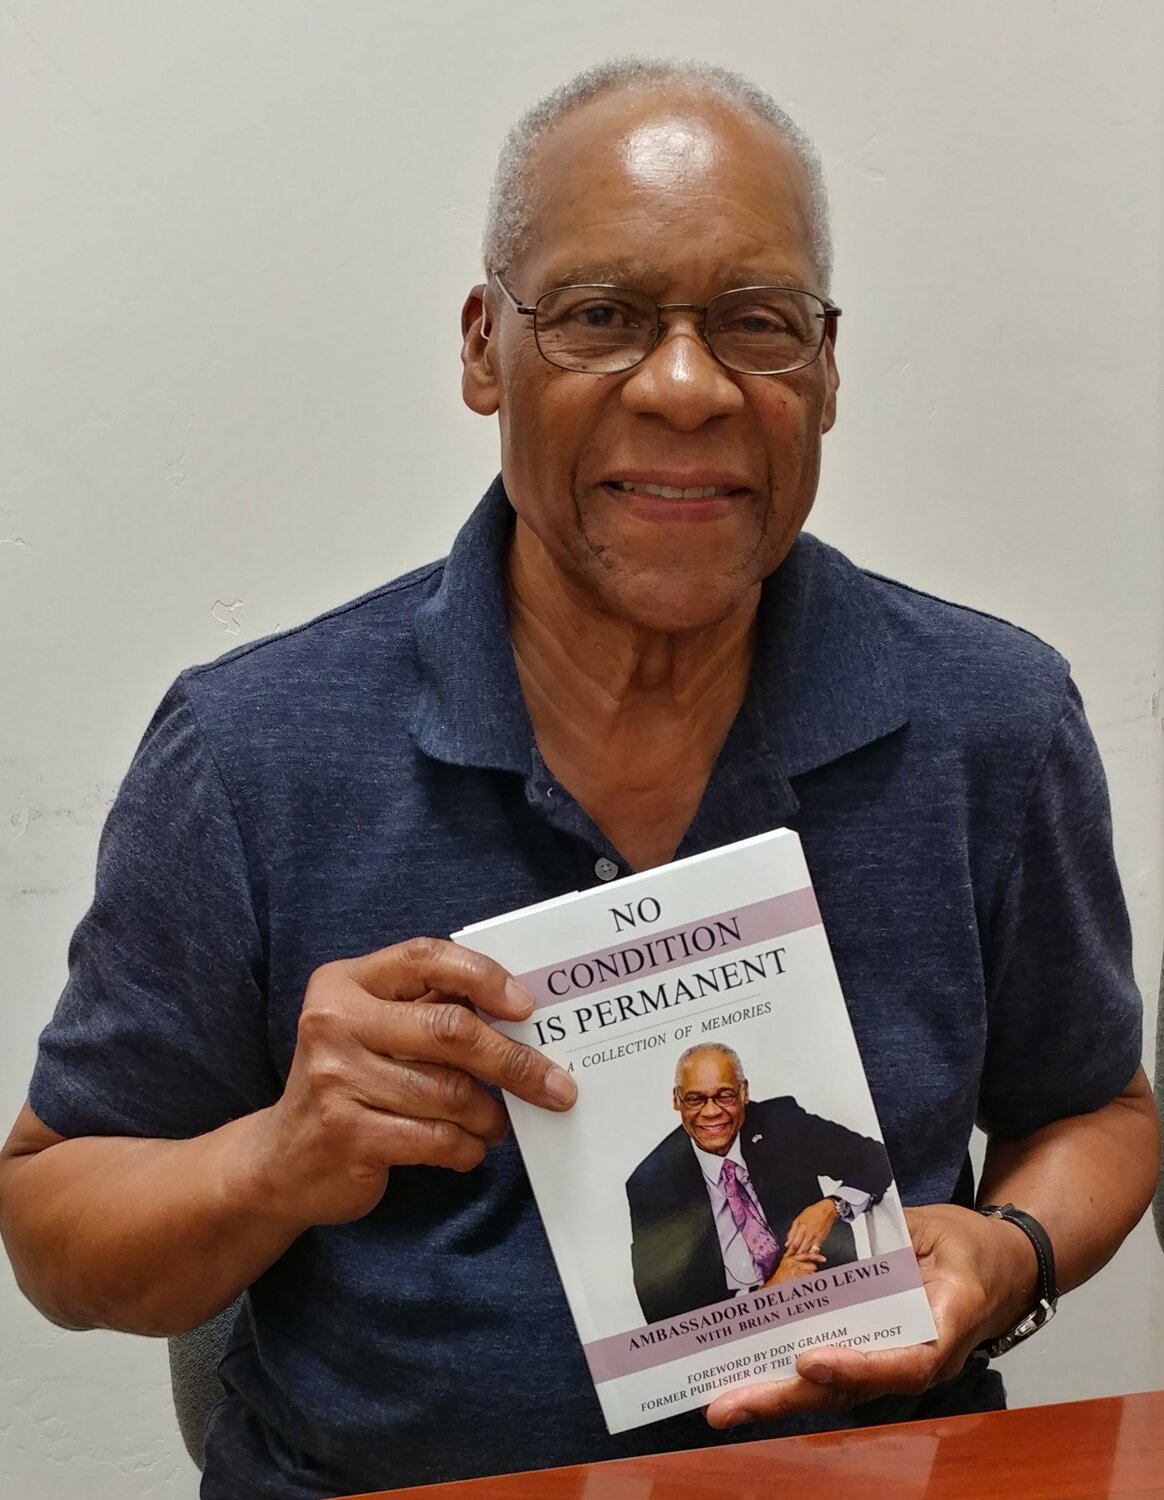 Retired ambassador and author Delano Lewis with his book, “No Condition Is Permanent: A Collection of Memories.”